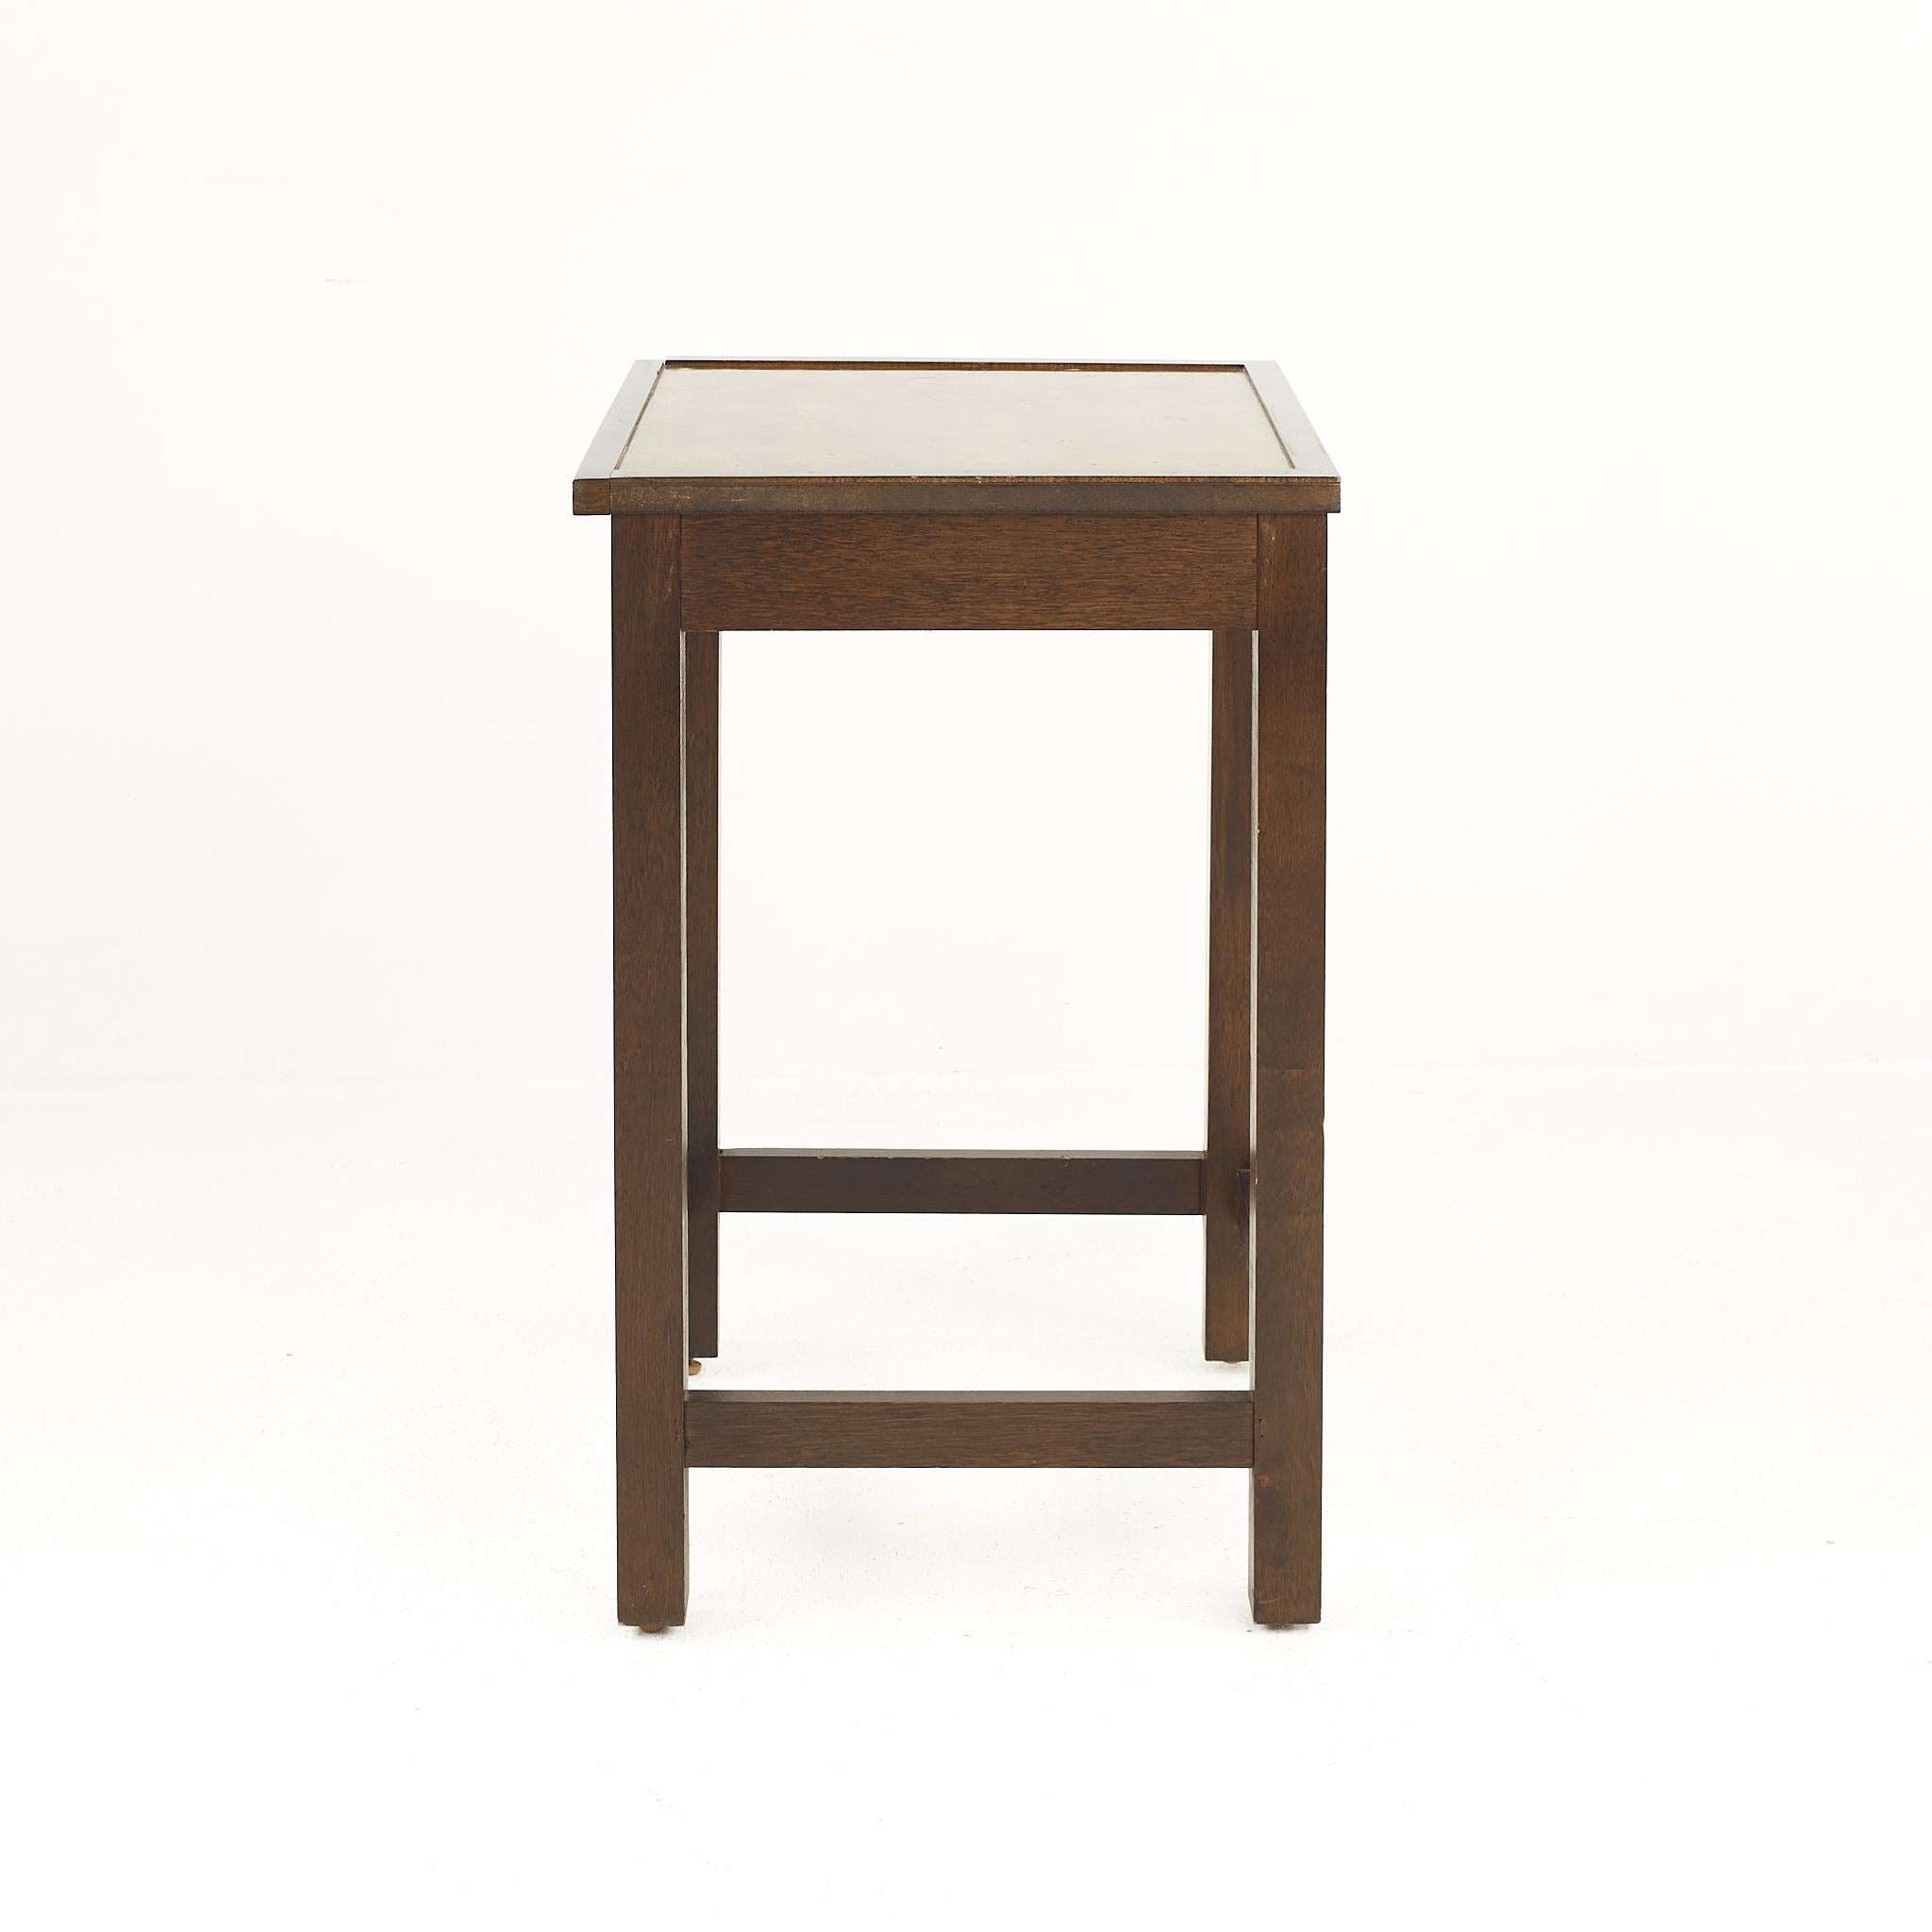 Century Furniture mid-century burlwood side table

The side table measures: 19 wide x 19 deep x 29.5 inches high

All pieces of furniture can be had in what we call restored vintage condition. That means the piece is restored upon purchase so